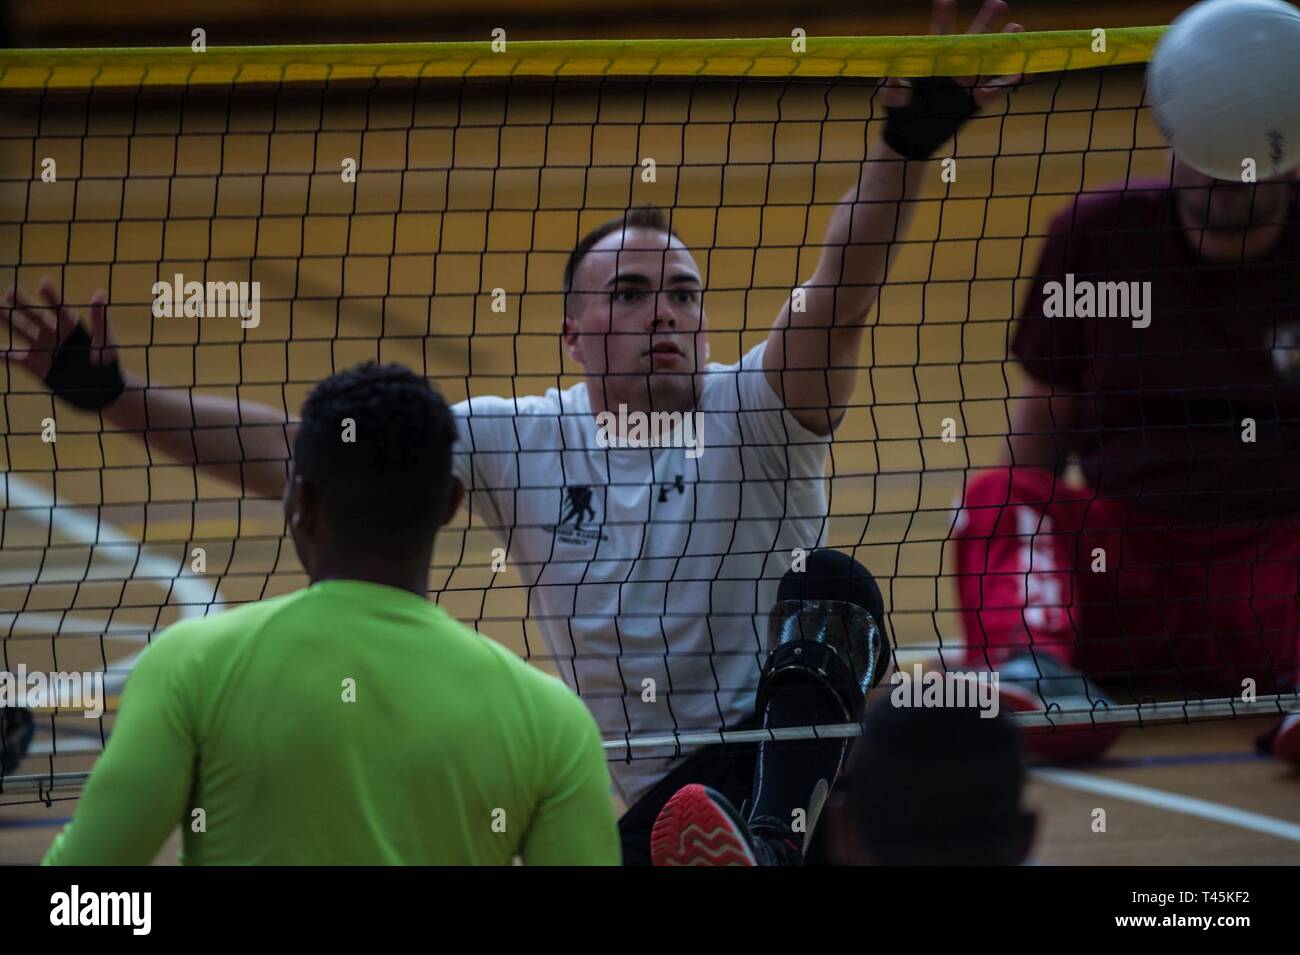 A U.S. Marine Corps athlete prepares to block during a 2019 Marine Corps Trials sitting volleyball practice session at Marine Corps Base Camp Pendleton, California, March 1. The Marine Corps Trials promotes recovery and rehabilitation through adaptive sports participation and develops camaraderie among recovering service members and veterans. Additionally, the competition is an opportunity for participants to demonstrate physical and mental achievements and serves as the primary venue to select Marine Corps participants for the DoD Warrior Games. Stock Photo